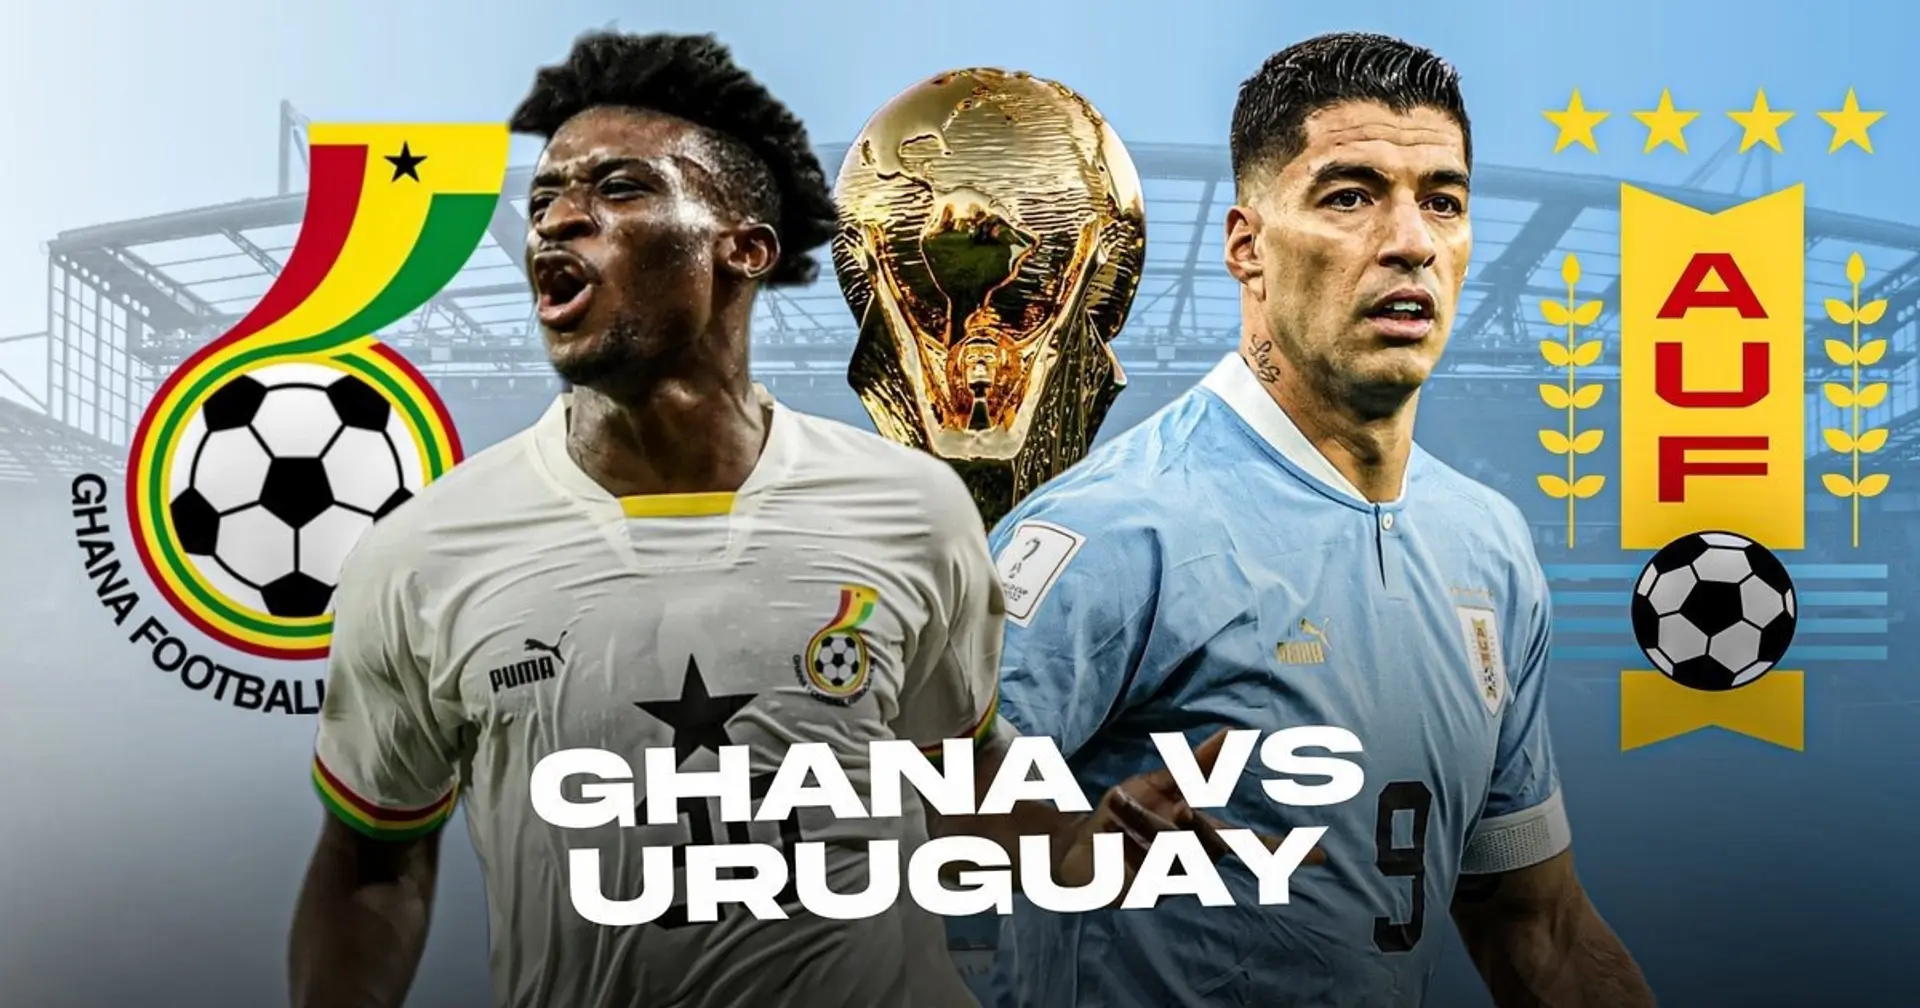 Ghana vs Uruguay: Official team lineups for the World Cup clash revealed 